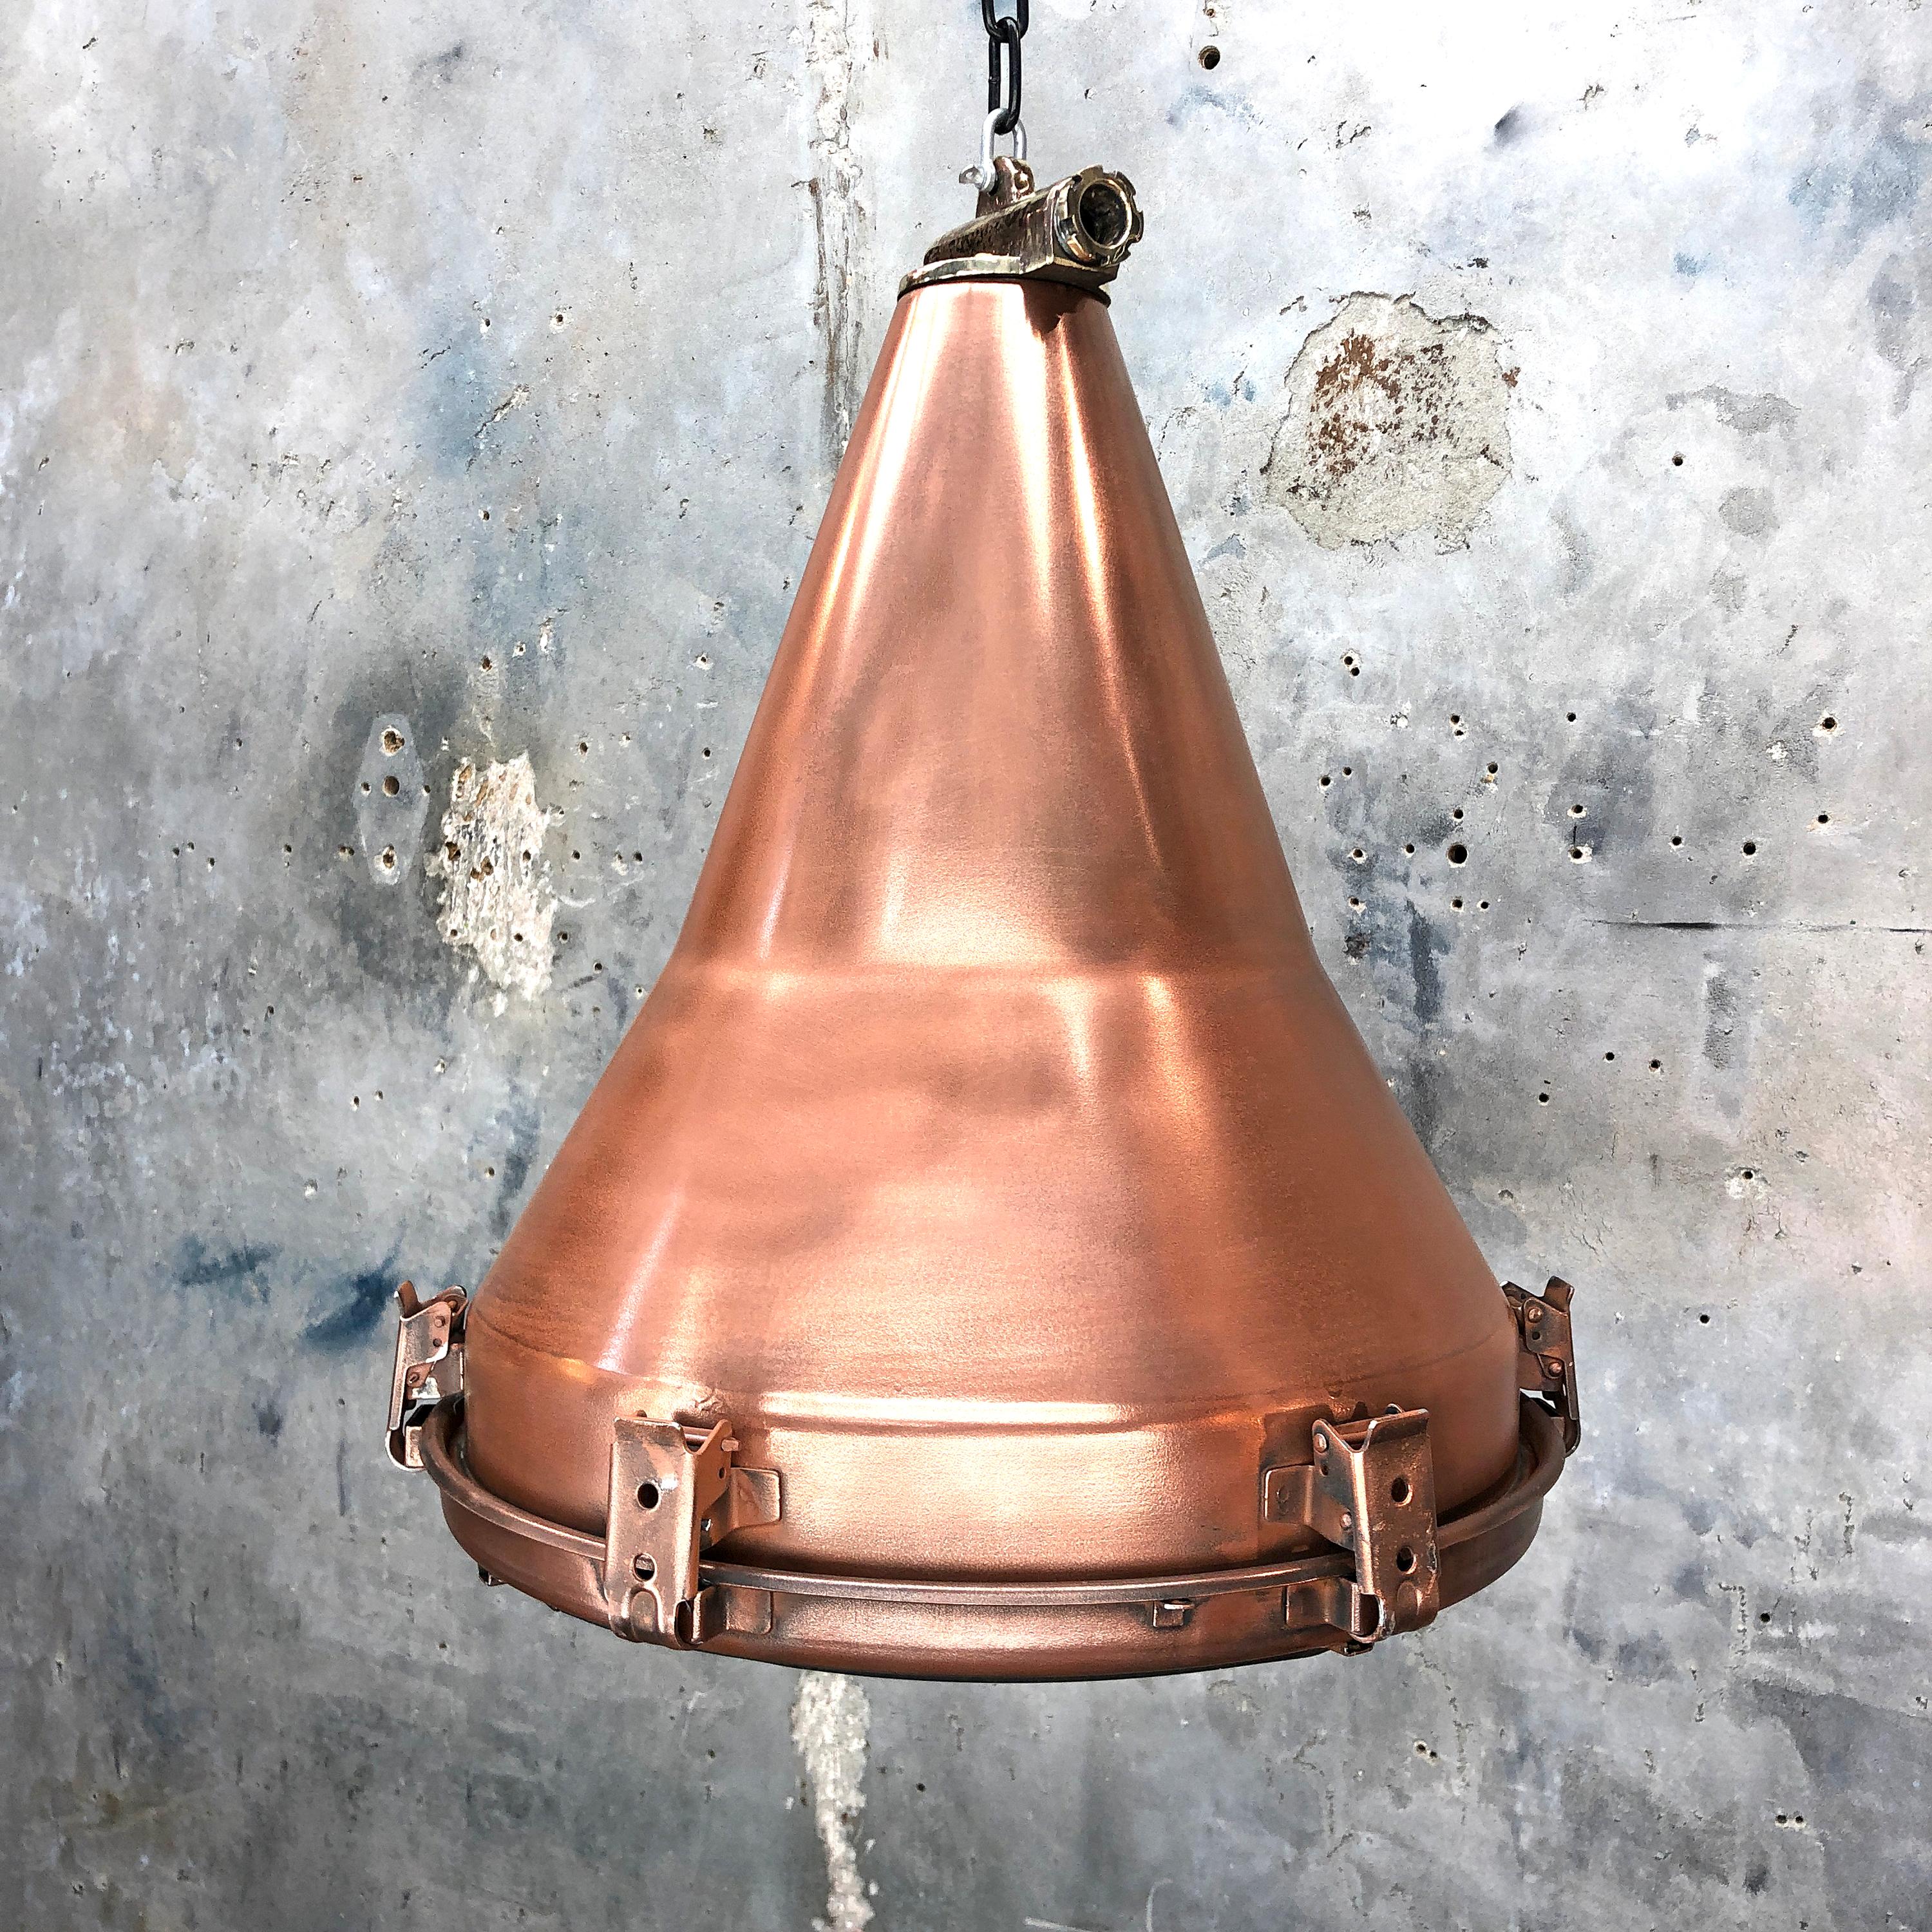 A retro Industrial copper ceiling pendant.
 
A reclaimed Korean light fixture reclaimed from decommissioned cargo ships circa 1970. Originally used on masts and gantries to flood light the container deck.
 
Specifications
Diameter 42cm
Height